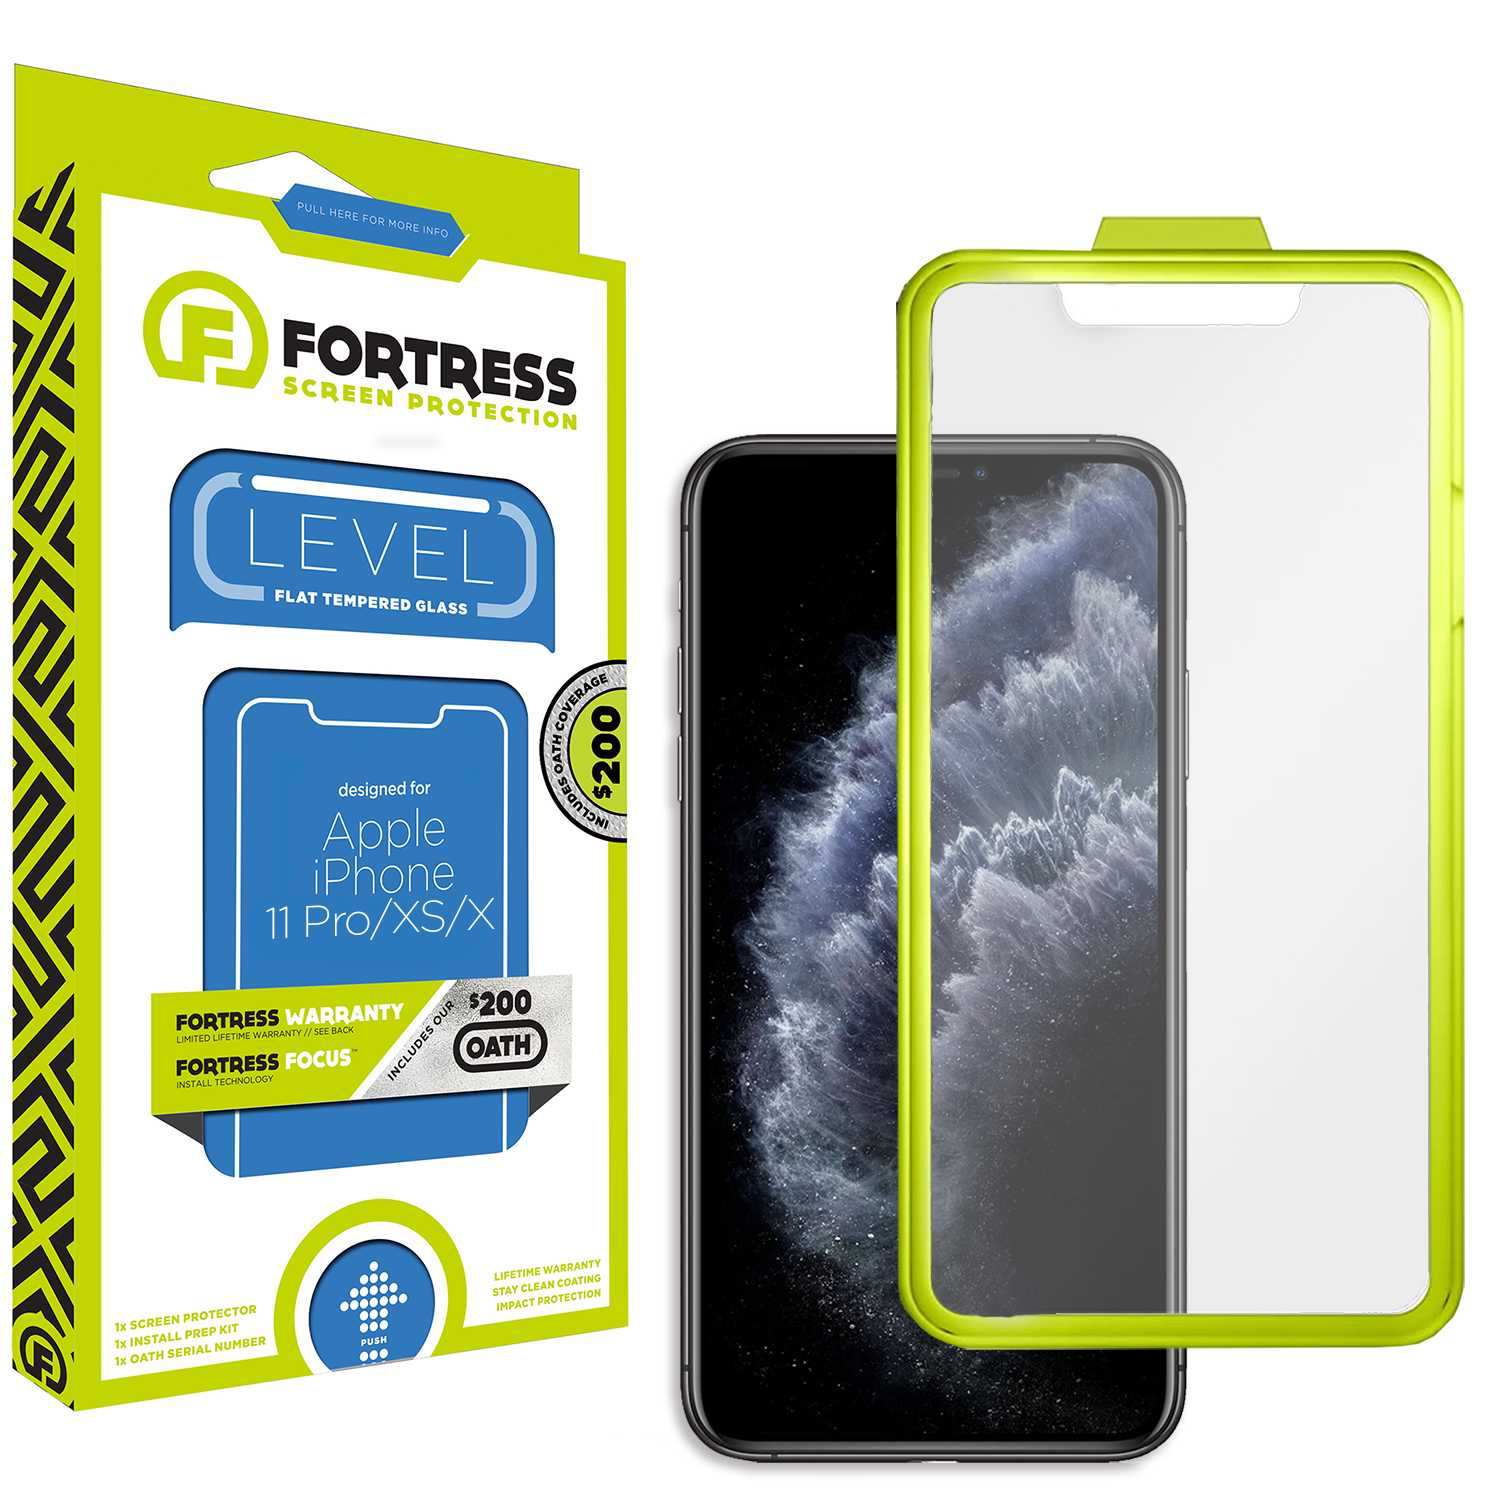 Fortress iPhone 11 Pro Screen Protector $200CoverageInstallTool Scooch Screen Protector